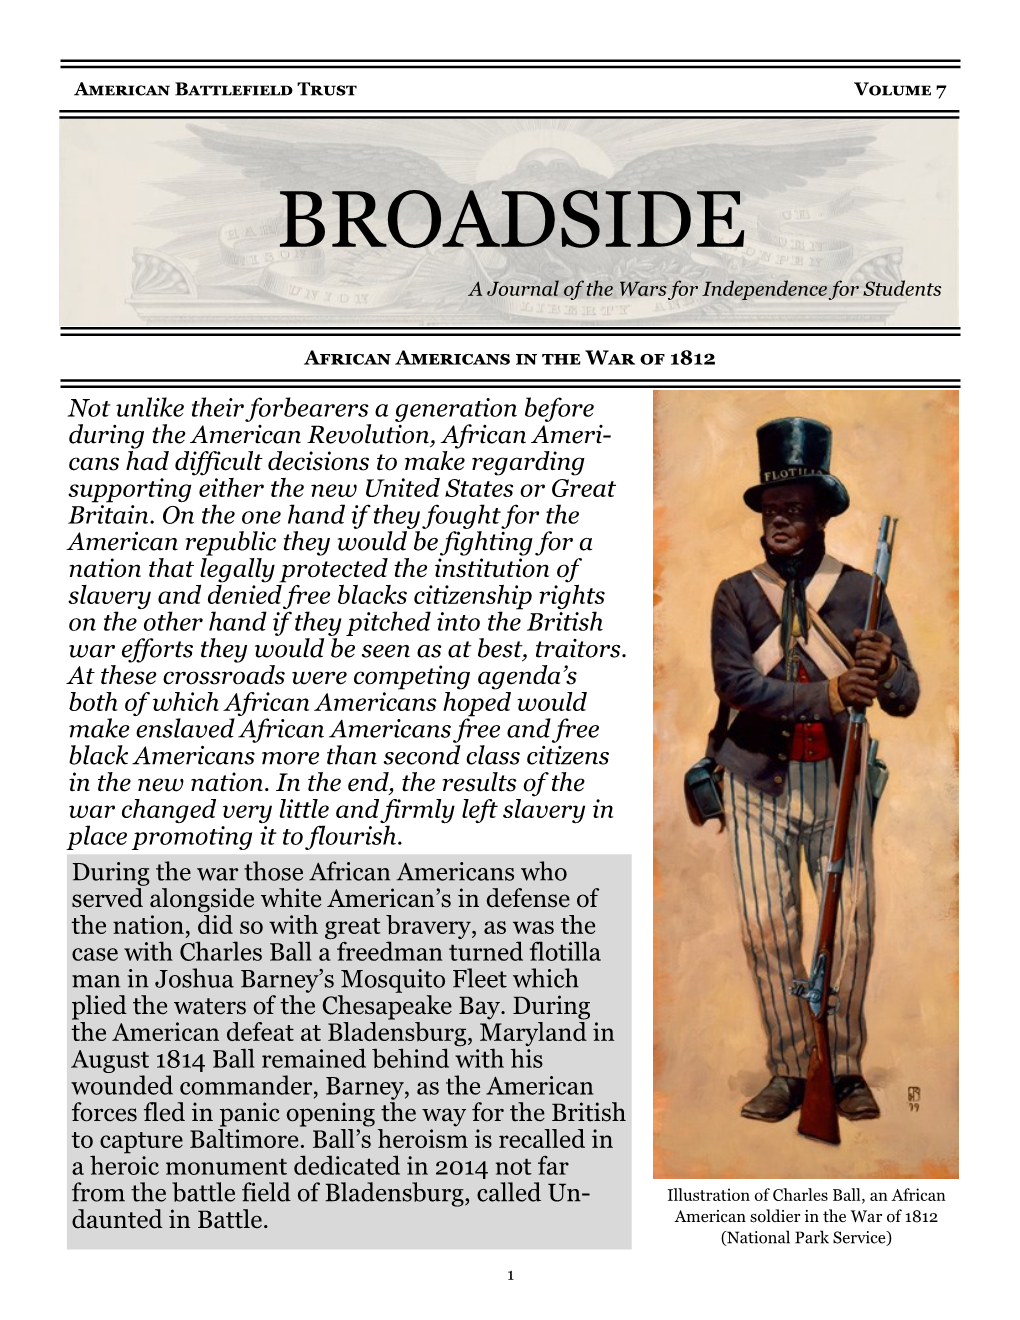 BROADSIDE a Journal of the Wars for Independence for Students